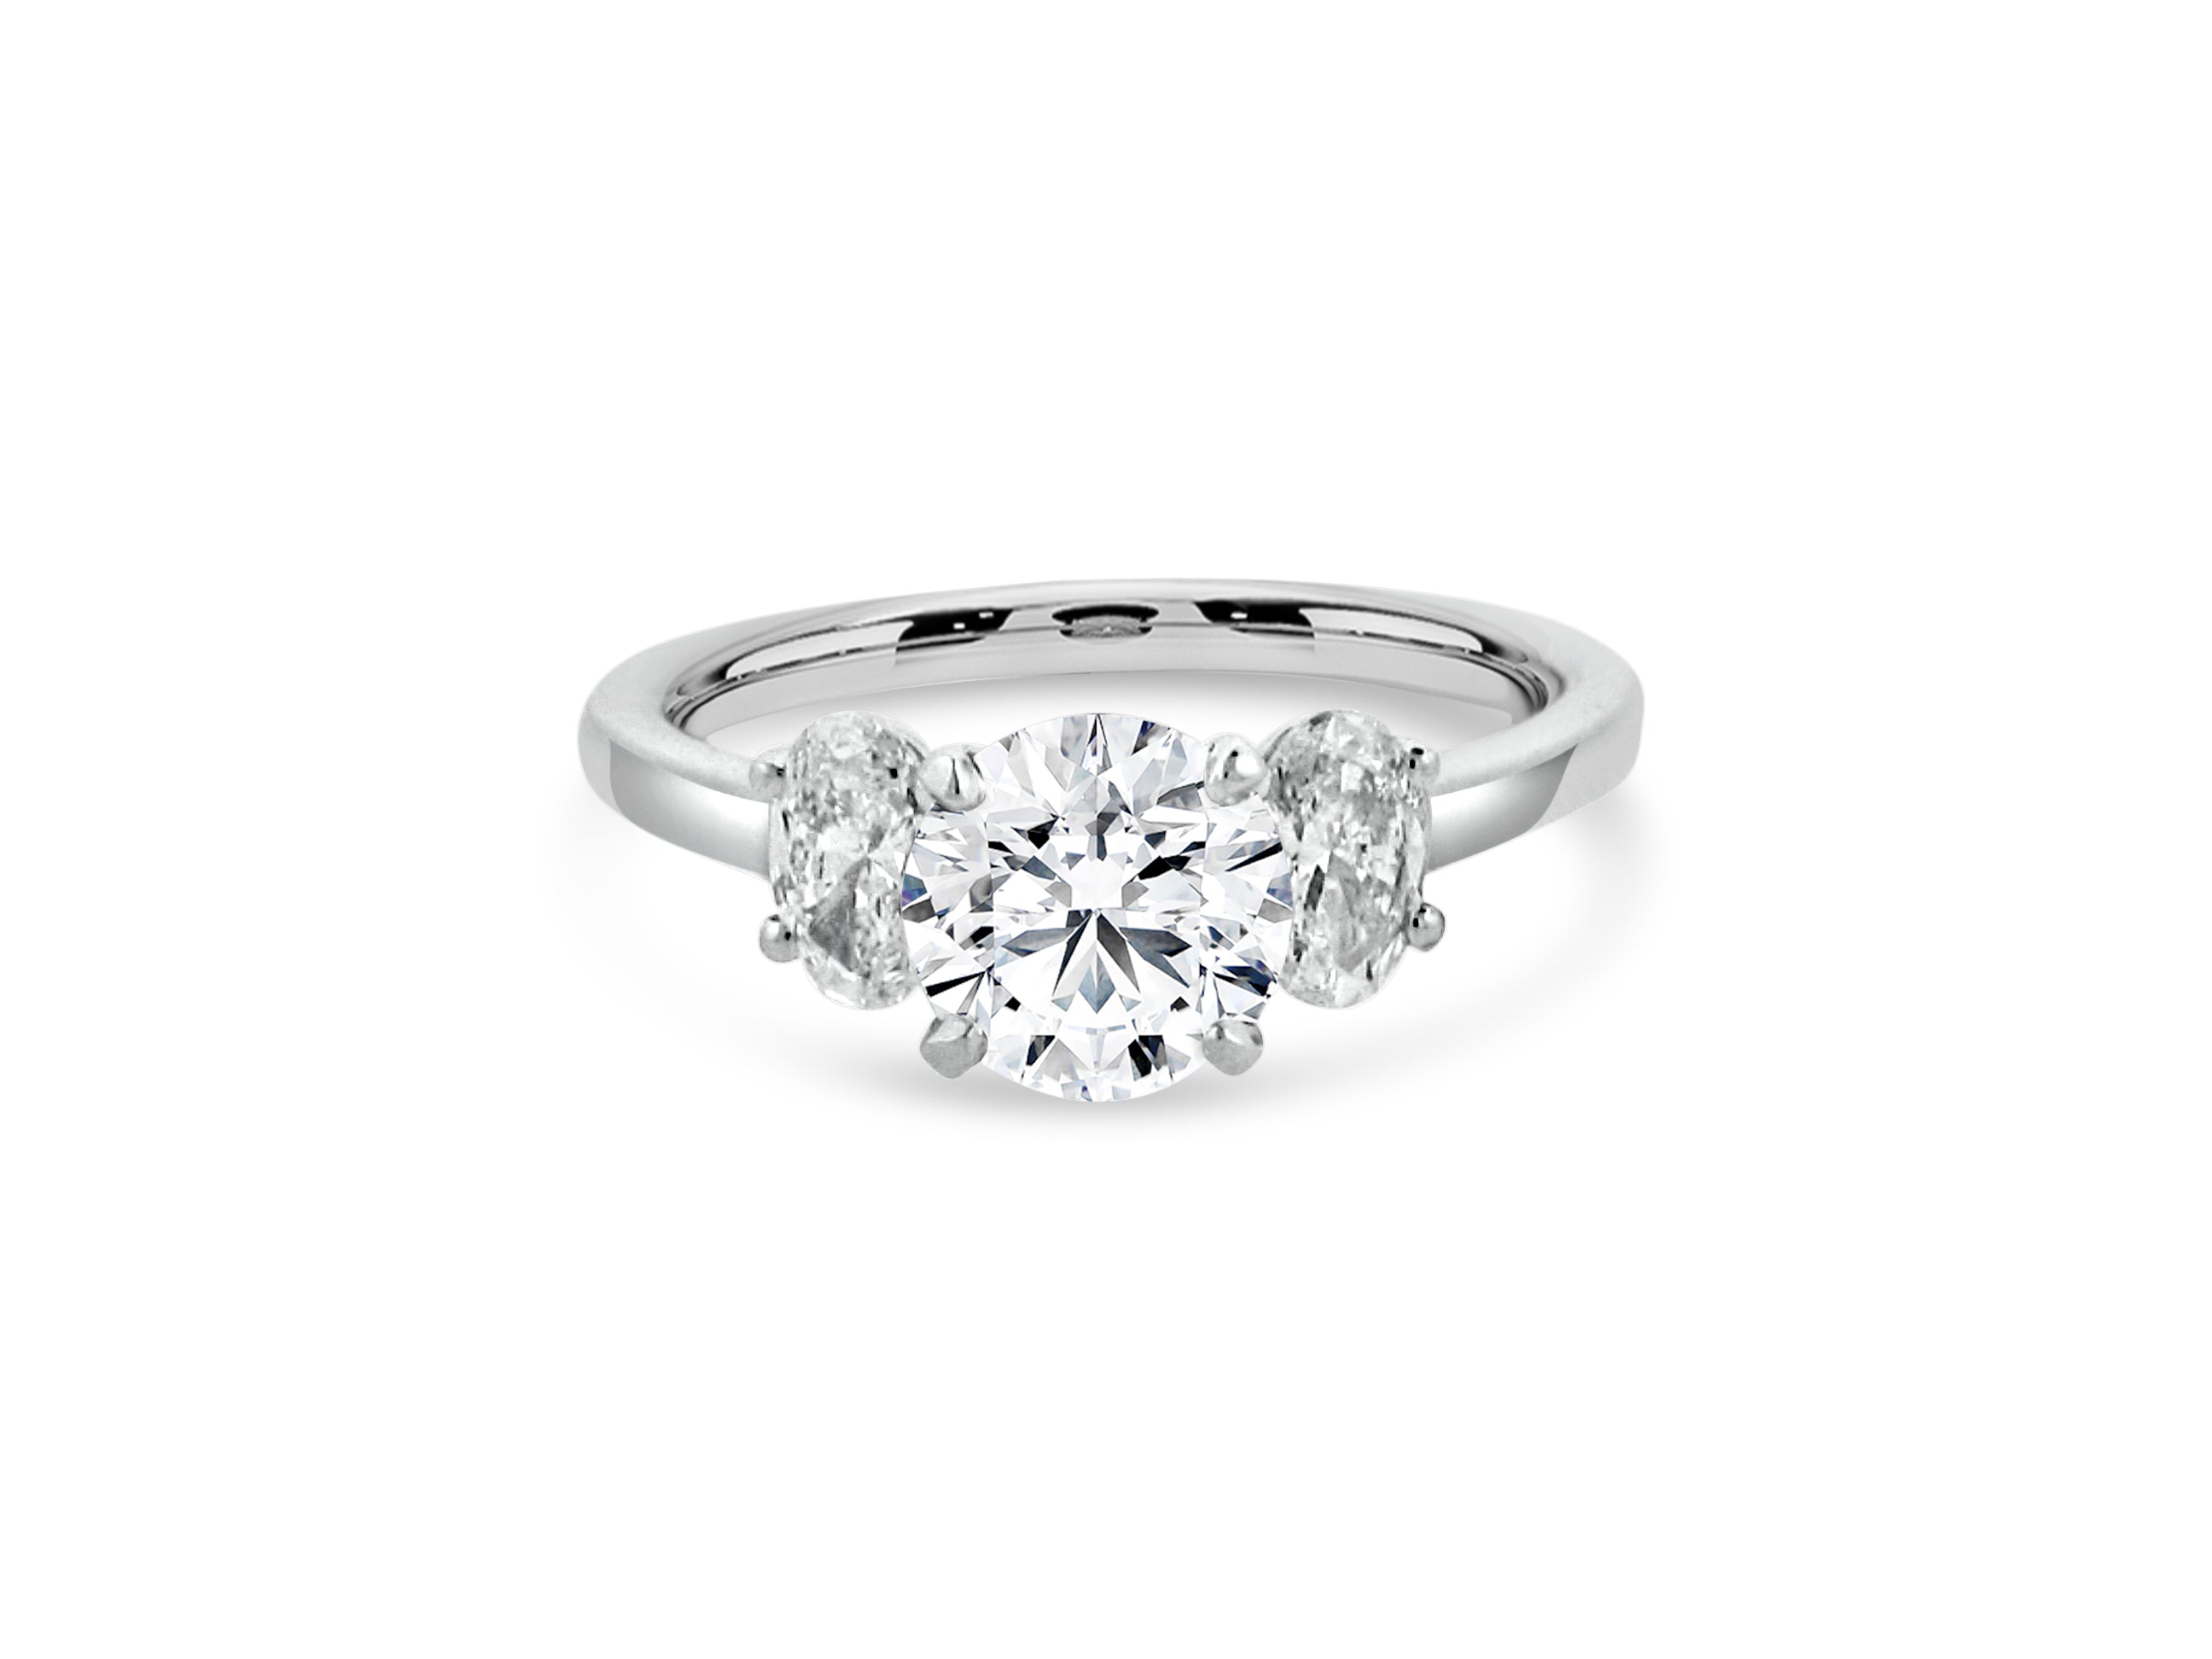 PRIVE'14K WHITE GOLD 1.37CT ROUND SI1 CLARITY AND E COLOR LAB GROWN  SWAROVSKI DIAMOND FLANKED WITH .60CT NATURAL OVAL DIAMONDES SI - G/H COLOR.   CERTIFIED. EXCELLENT CUT8